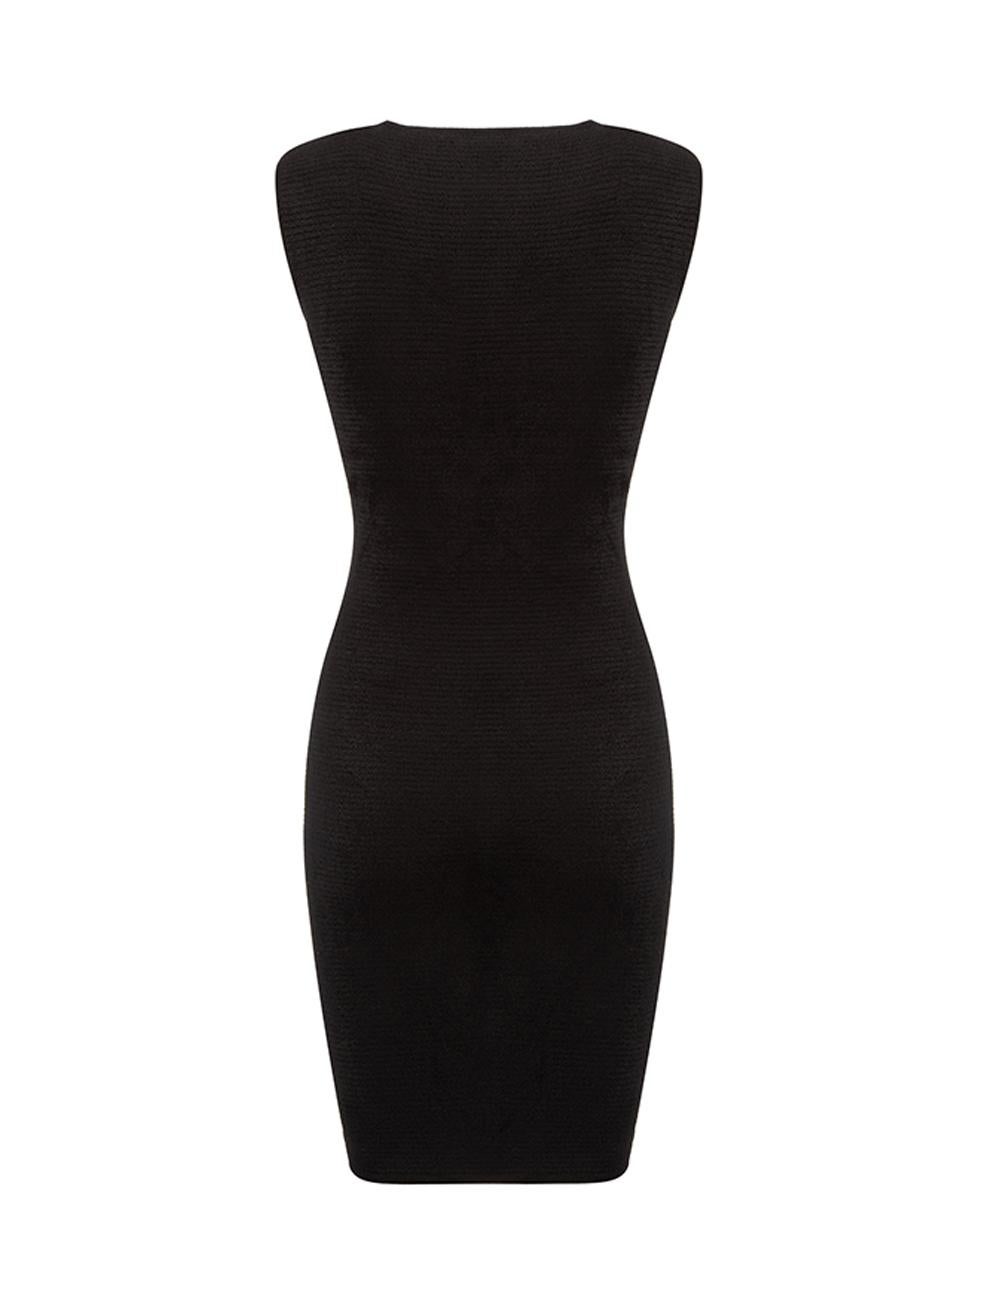 Alexander Wang Women's Black Sleeveless Textured Dress In Excellent Condition In London, GB